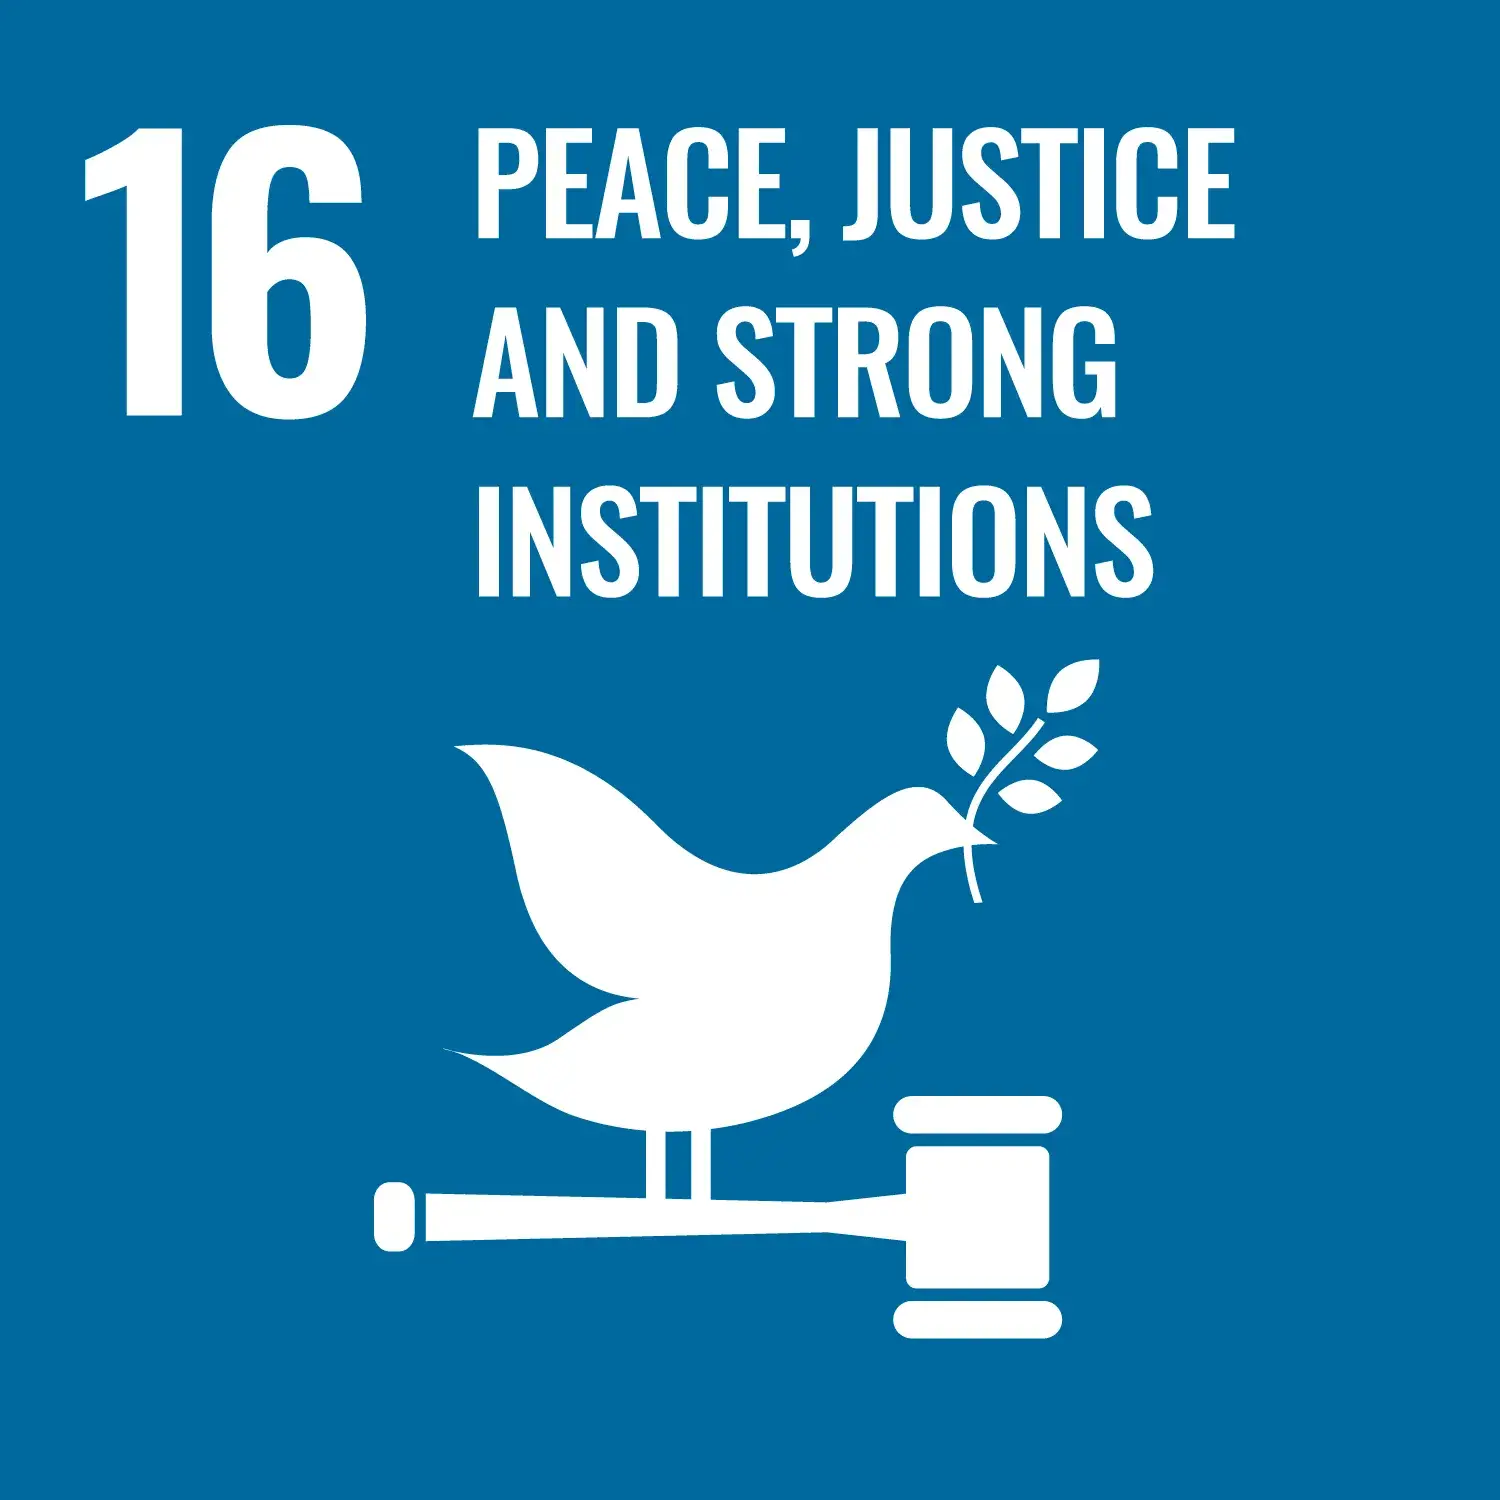 Goal 16 peace, justice and strong institution